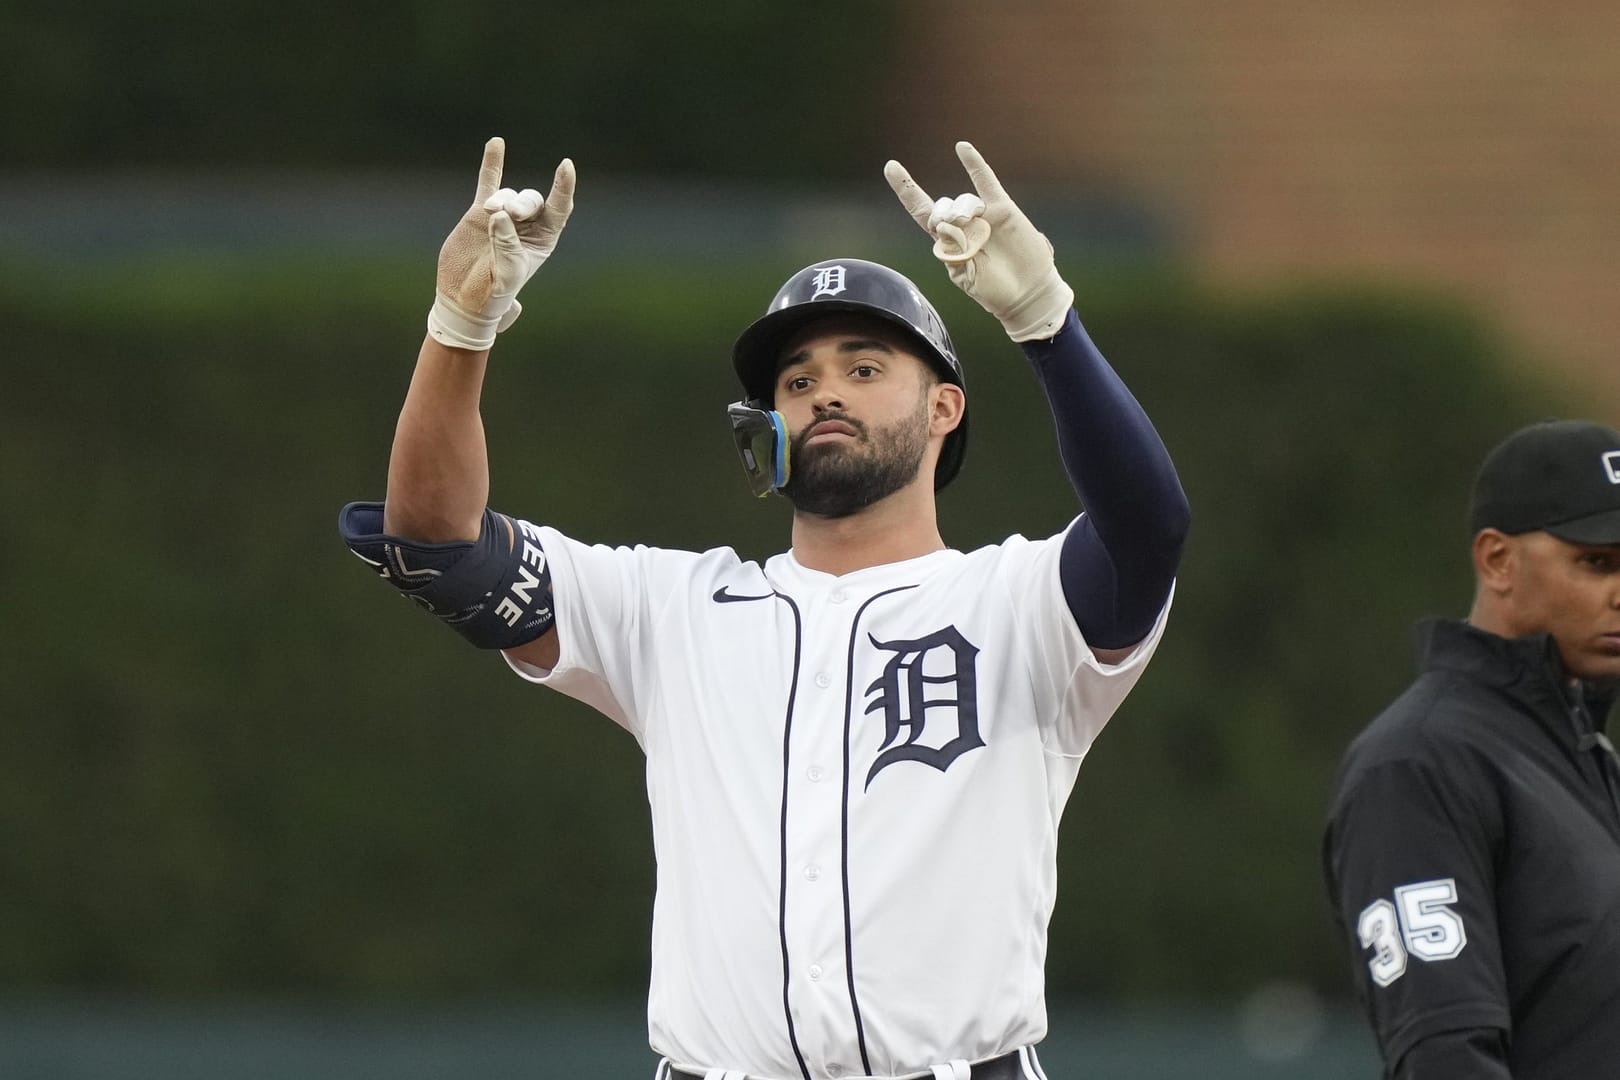 Our experts dish out their MLB picks and predictions for Friday, June 28, including three bets on batters with home run upside...